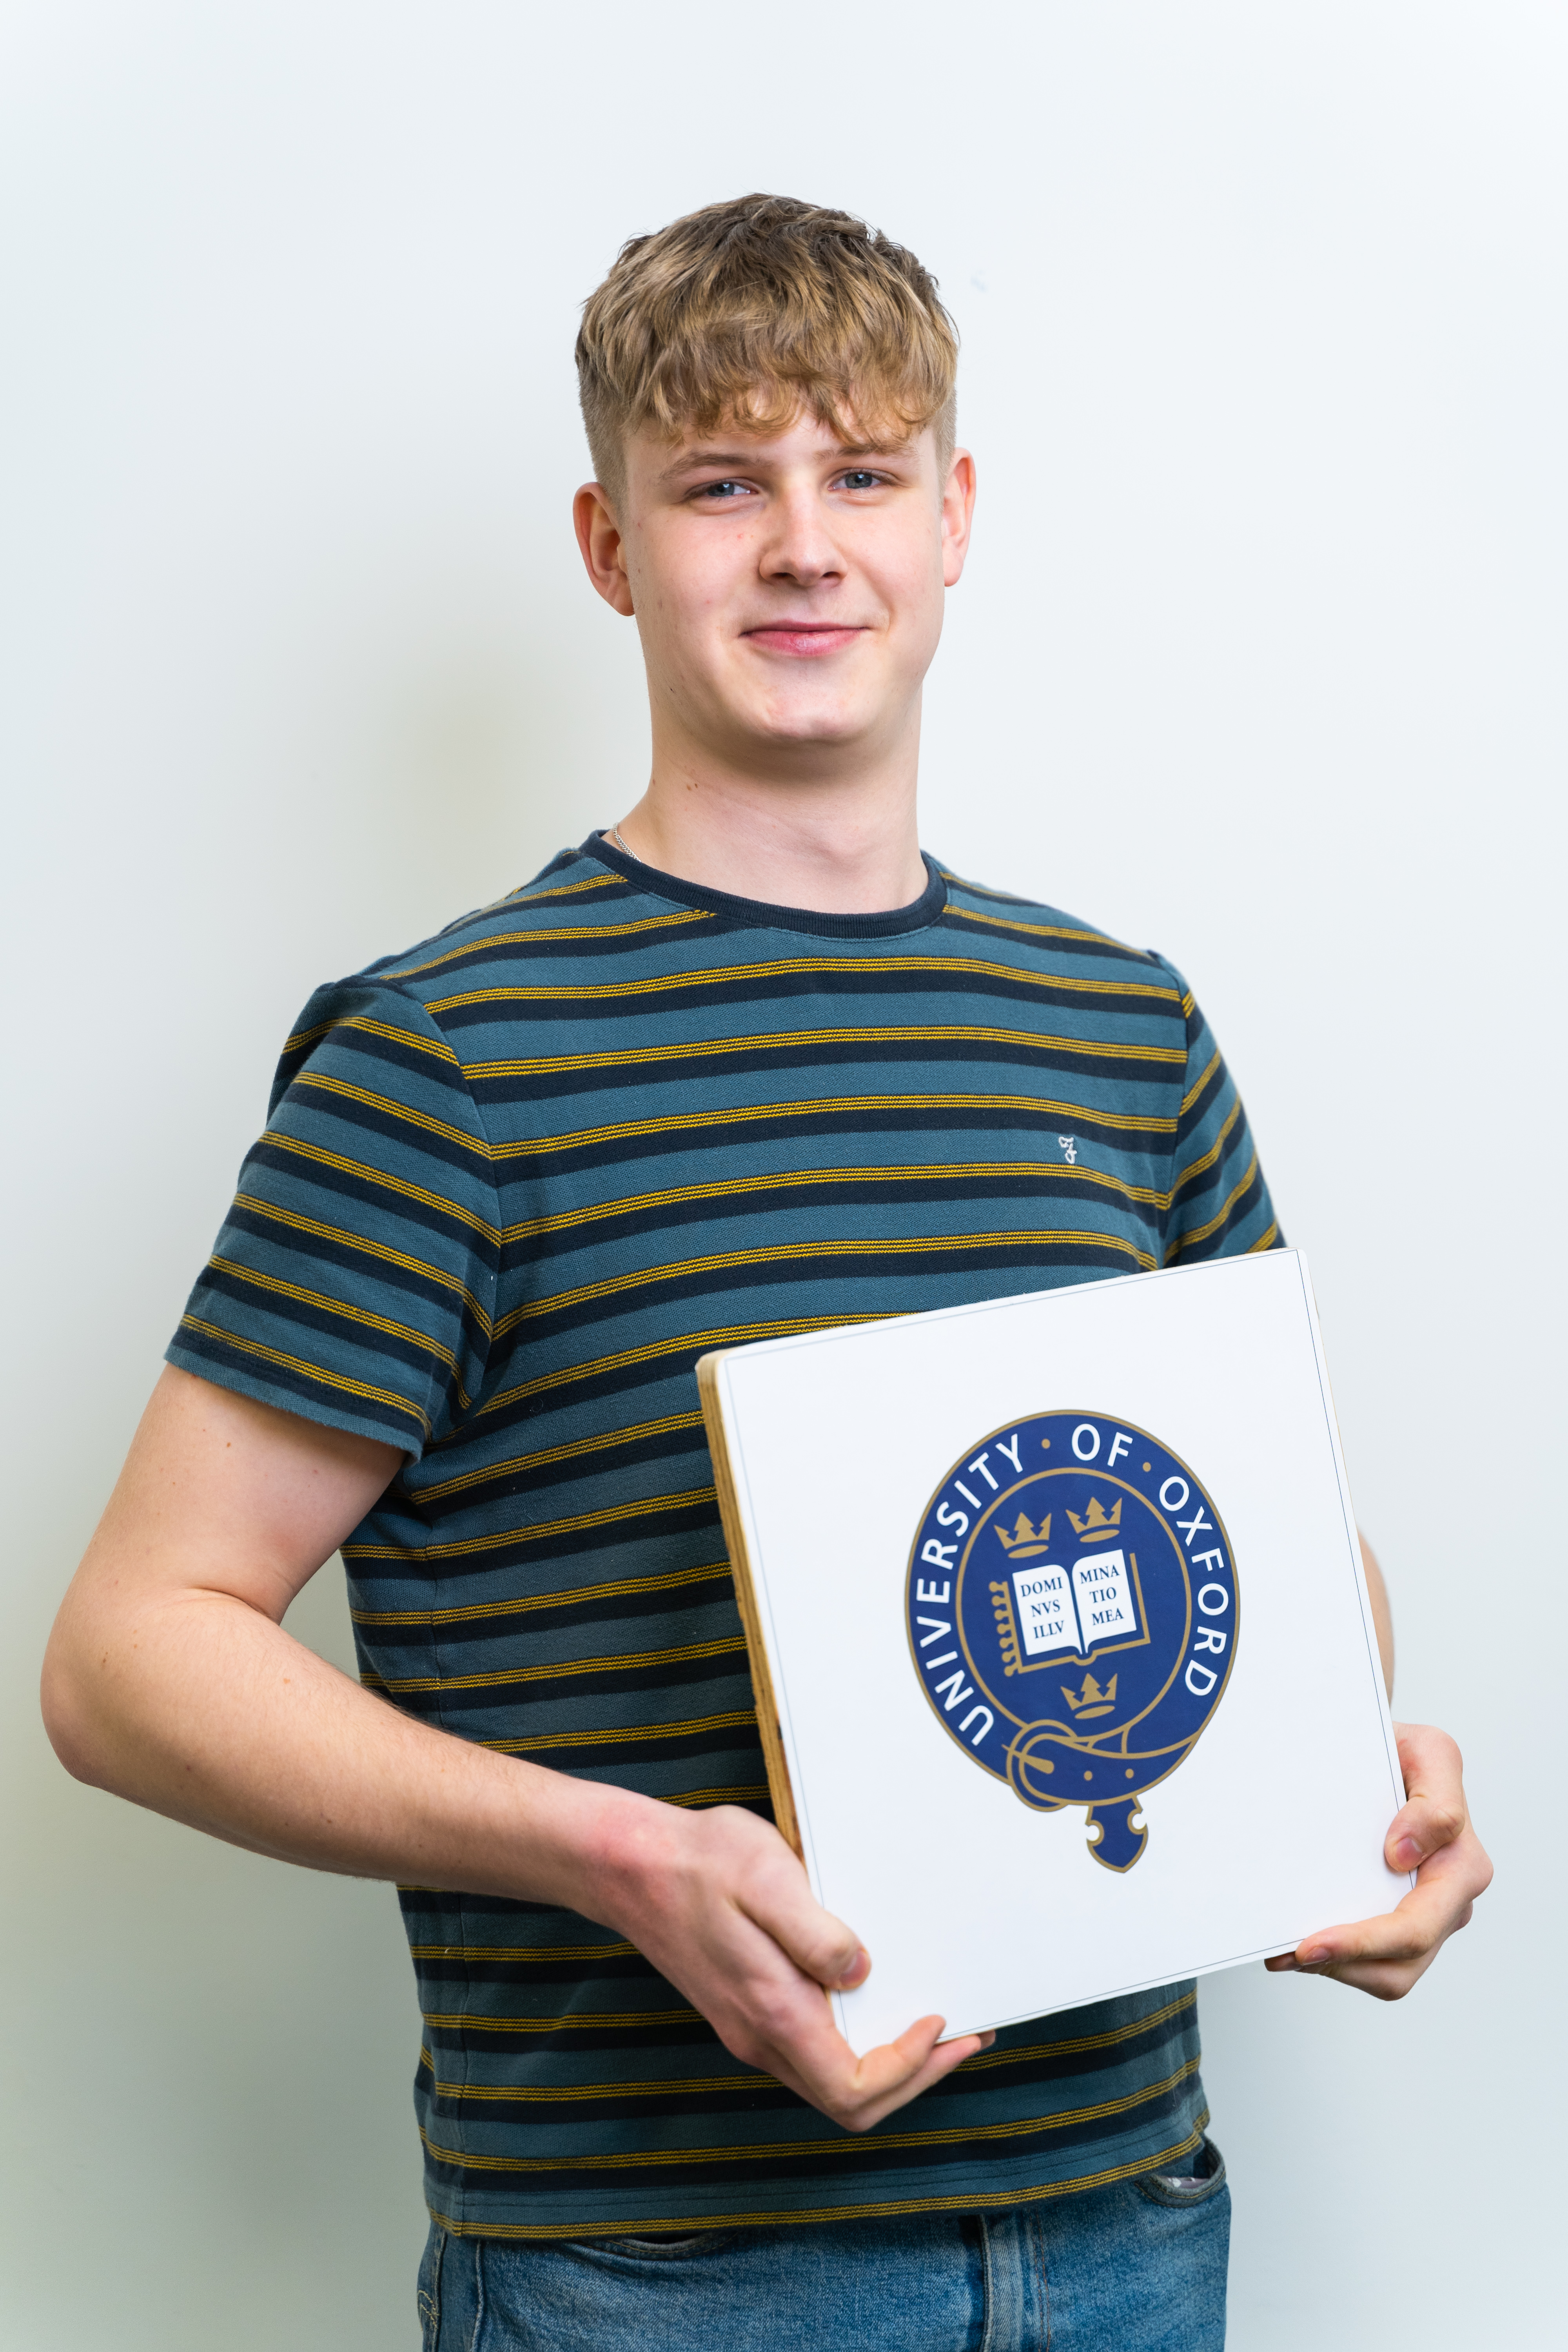 Congratulations to ex-student Felix Smithson who has received an offer to study Theology & Philosophy at Oxford University 2022 entry